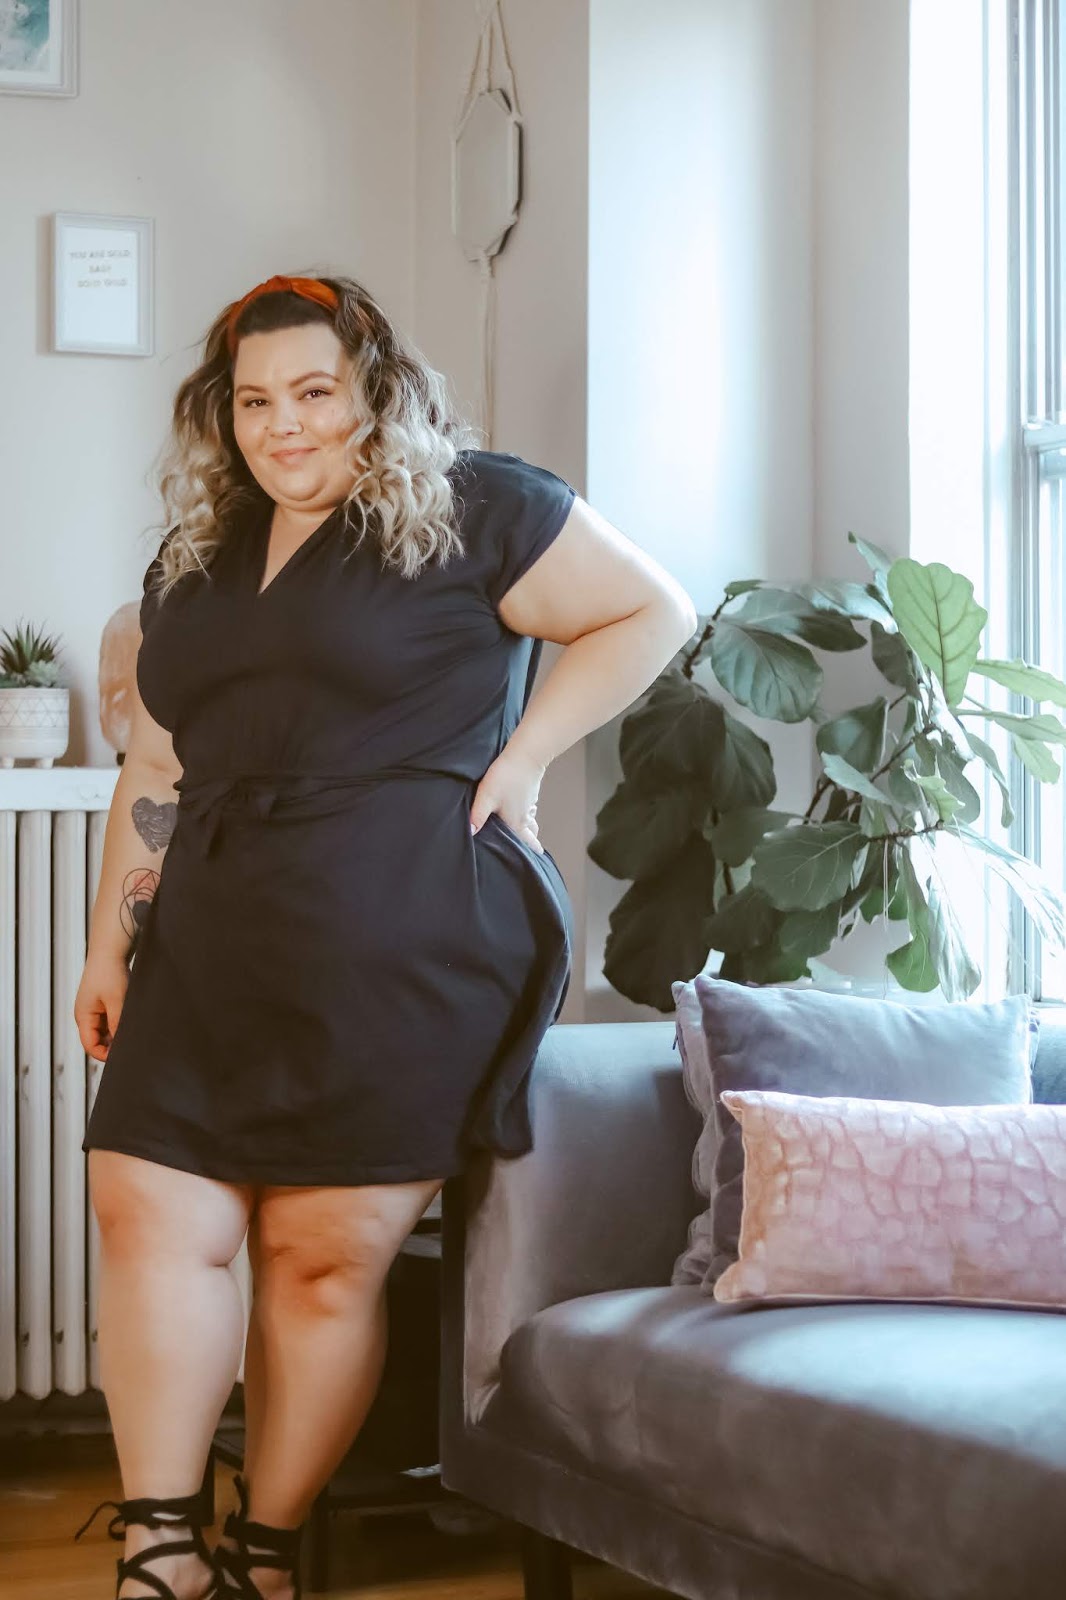 Chicago Plus Size Petite Fashion Blogger,Natalie in the City reviews Mata Traders sustainable ethical dresses.